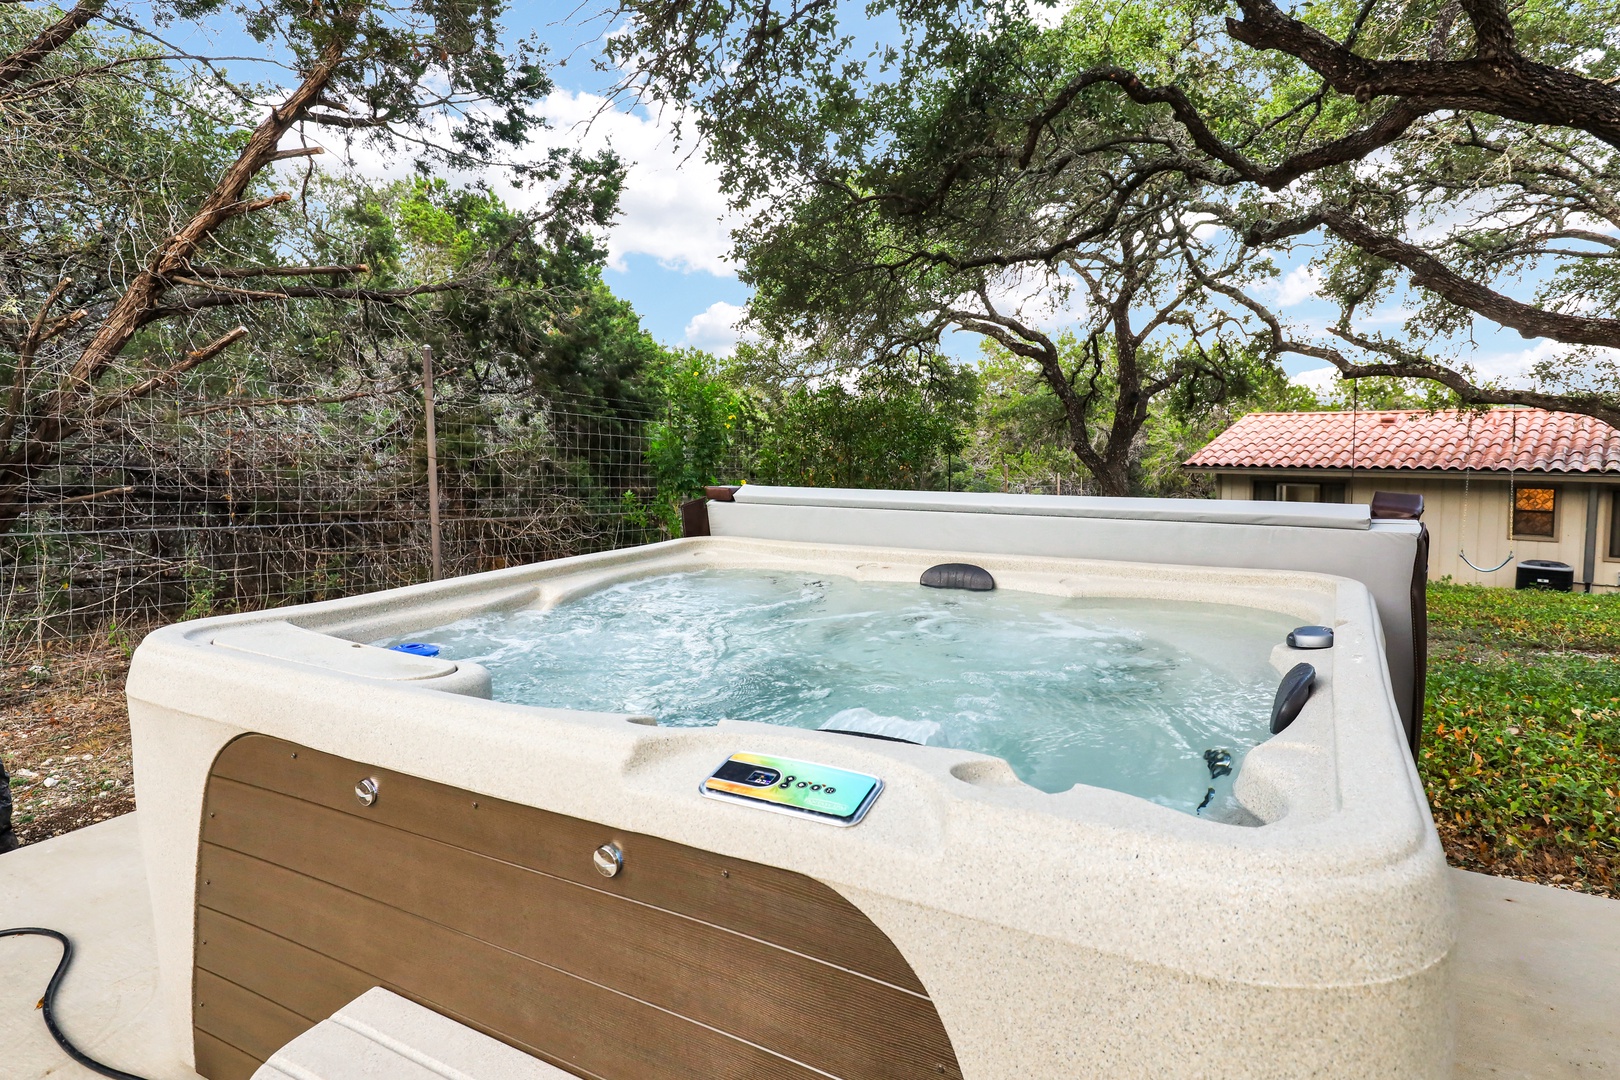 Soak your cares away in the bubbling private hot tub